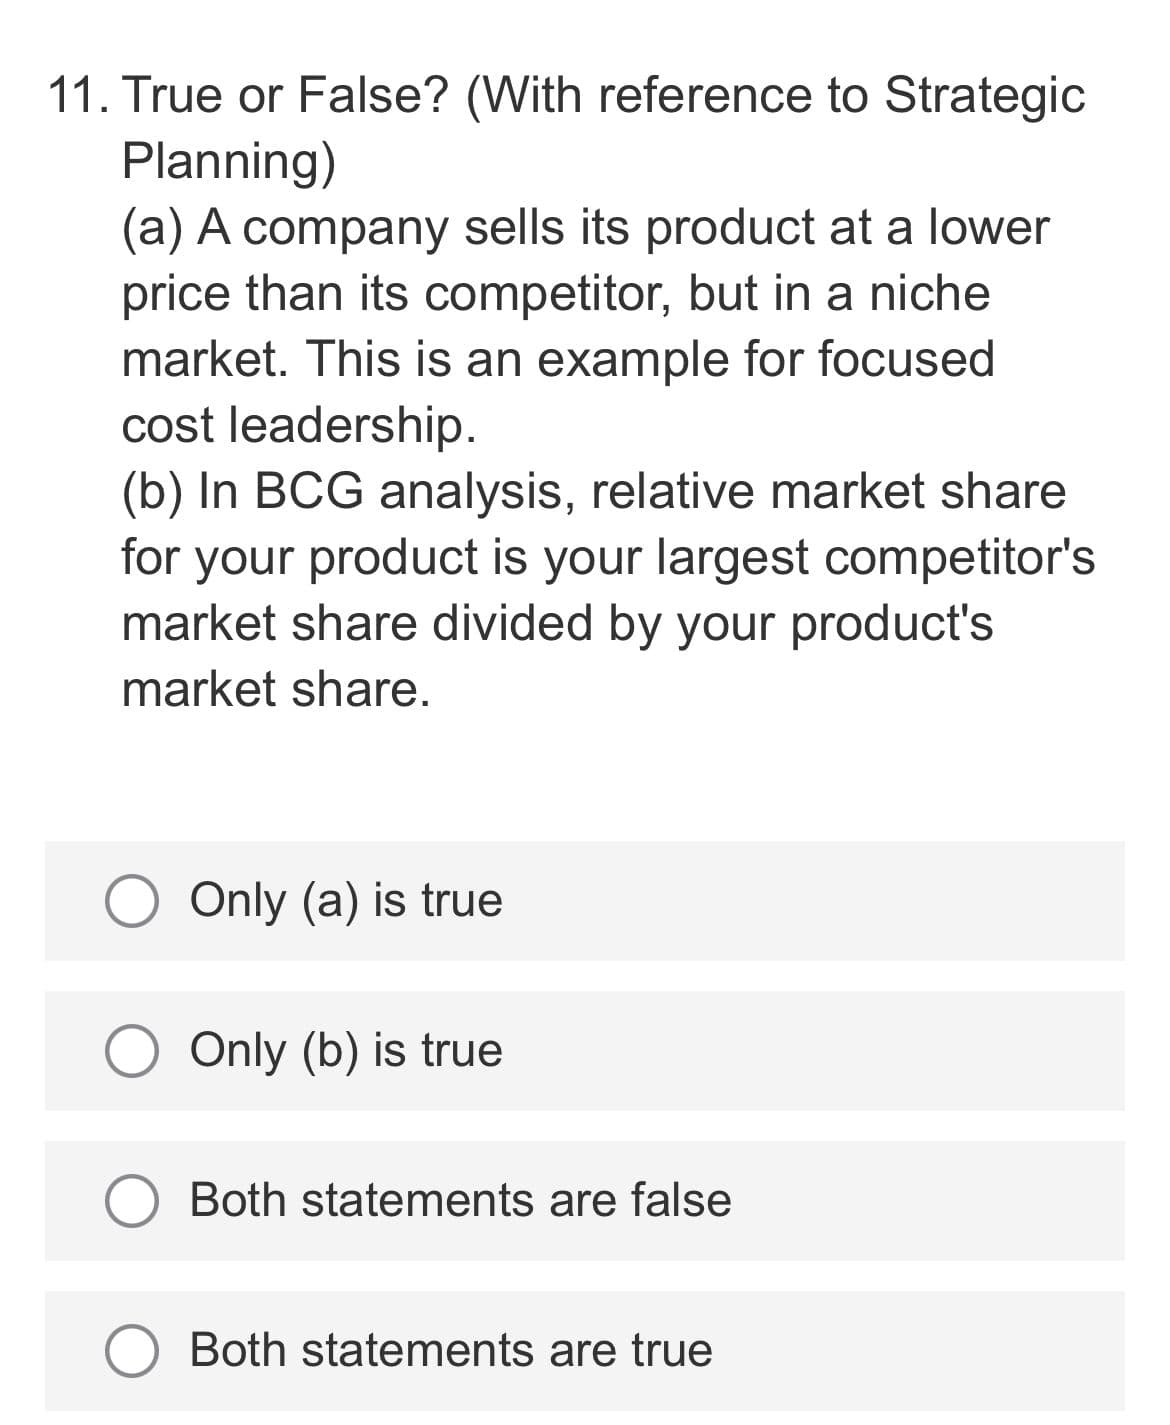 11. True or False? (With reference to Strategic
Planning)
(a) A company sells its product at a lower
price than its competitor, but in a niche
market. This is an example for focused
cost leadership.
(b) In BCG analysis, relative market share
your product is your largest competitor's
market share divided by your product's
for
market share.
Only (a) is true
Only (b) is true
Both statements are false
Both statements are true
